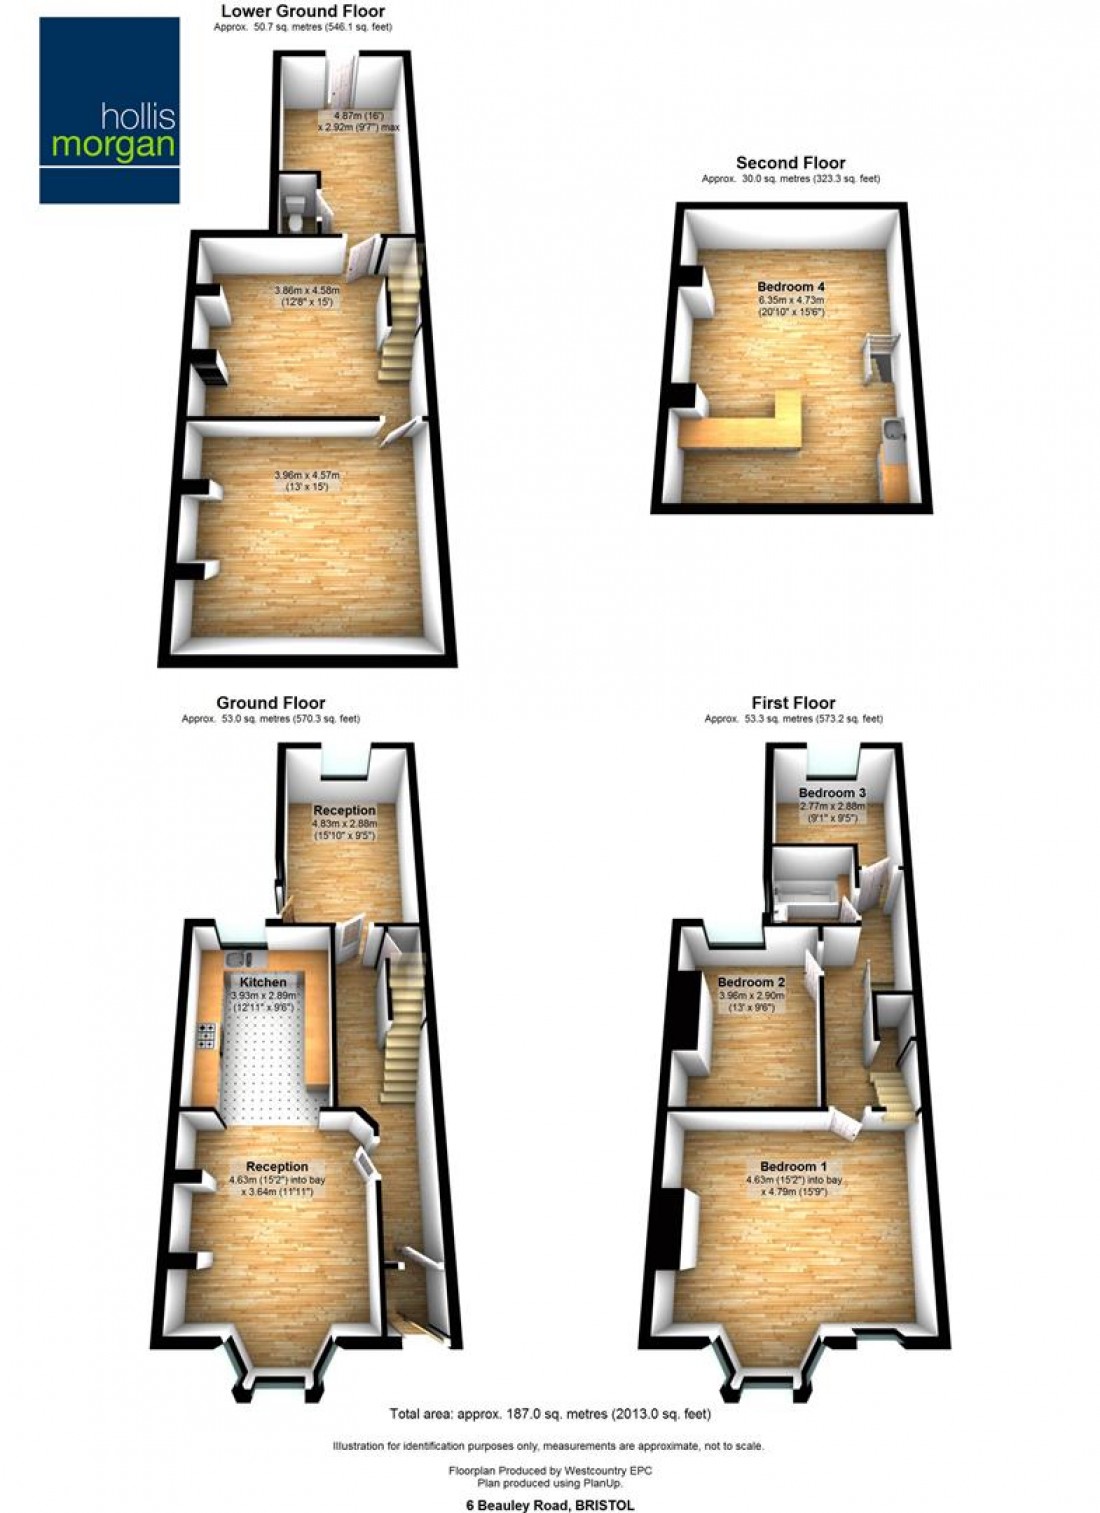 Floorplan for House and Plot @ 6 Beauley Road, Southville, Bristol